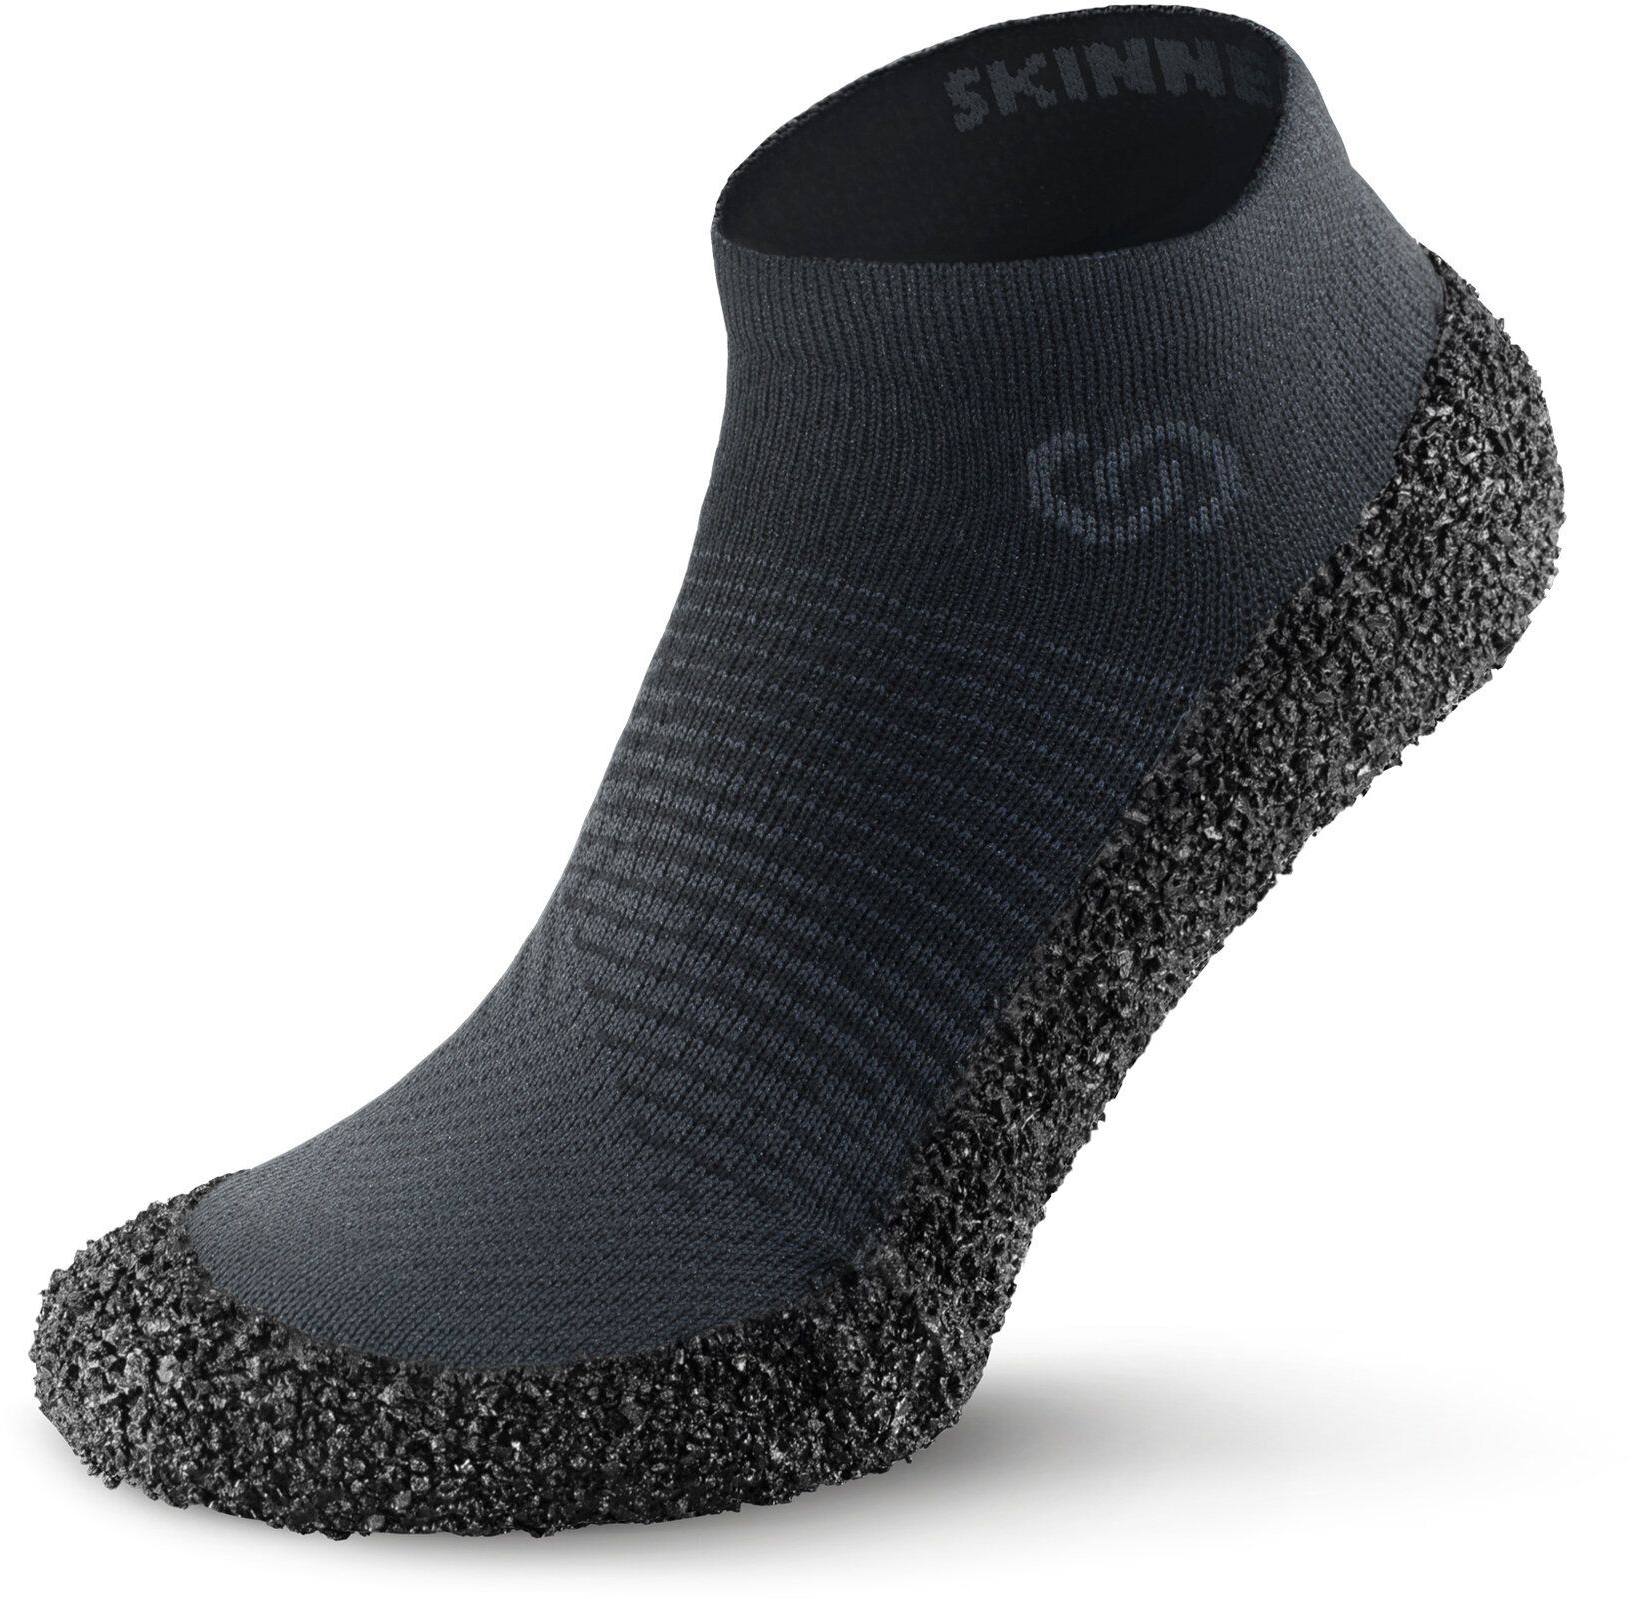 Skinners 2.0 Anthracite L